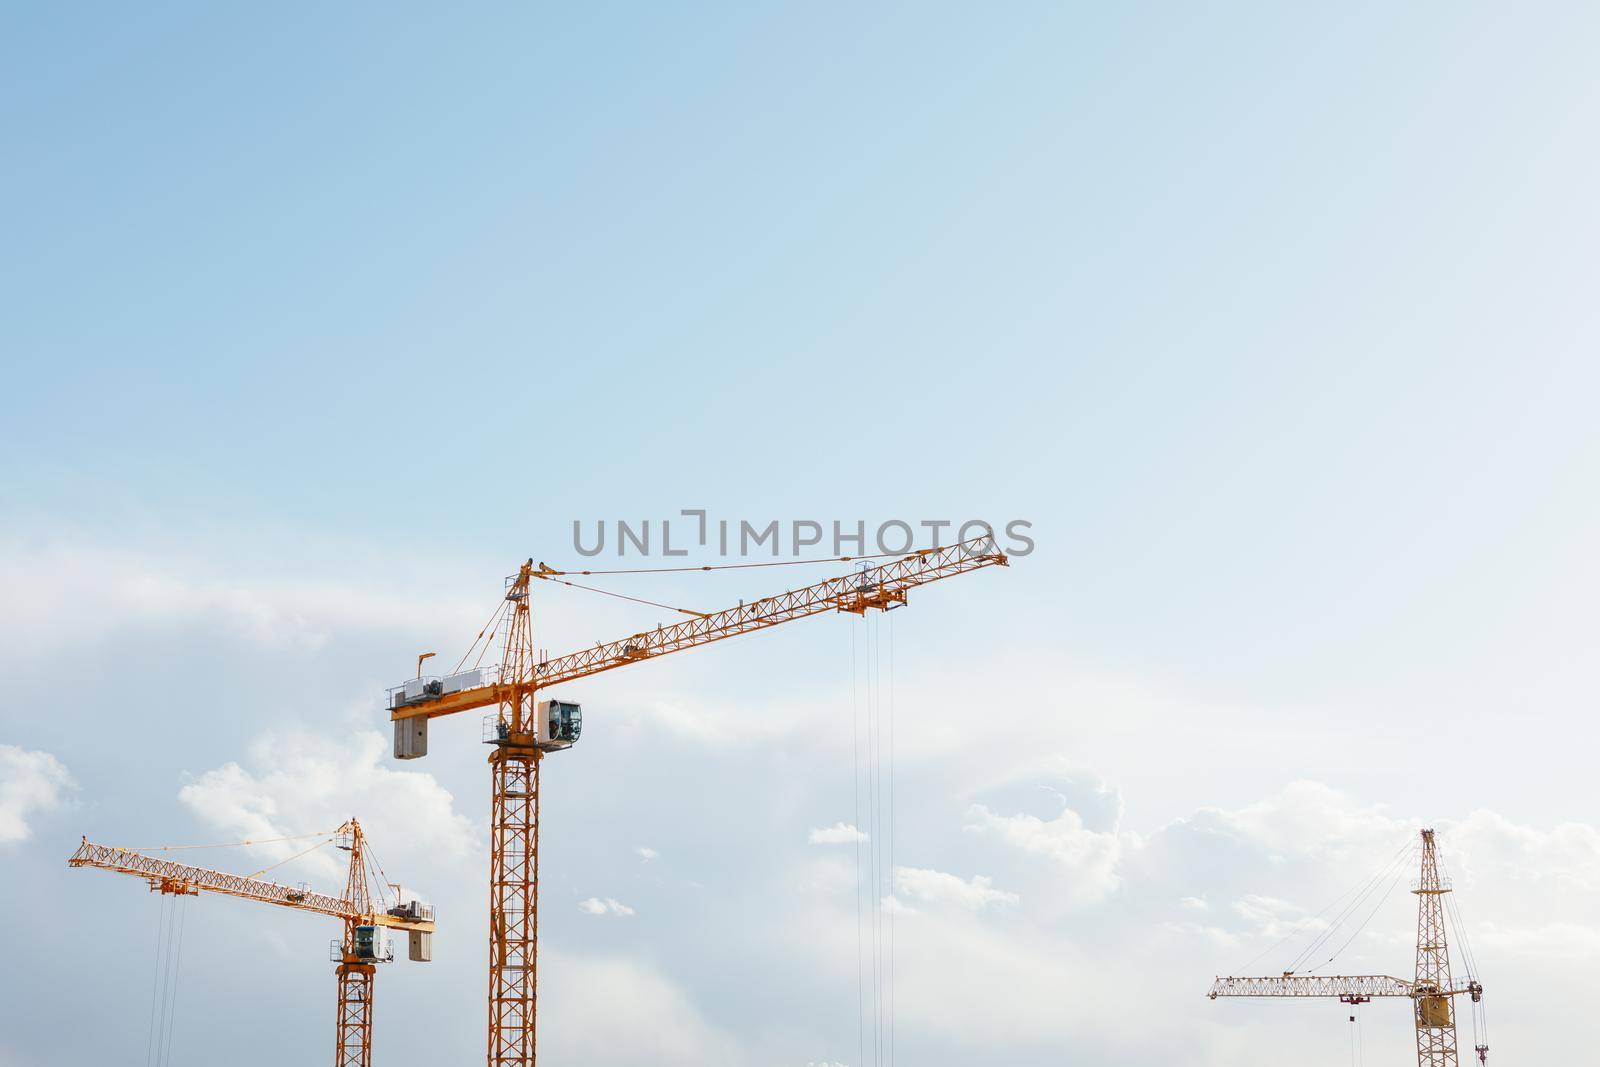 building cranes at the construction site on blue sky background by nikkytok